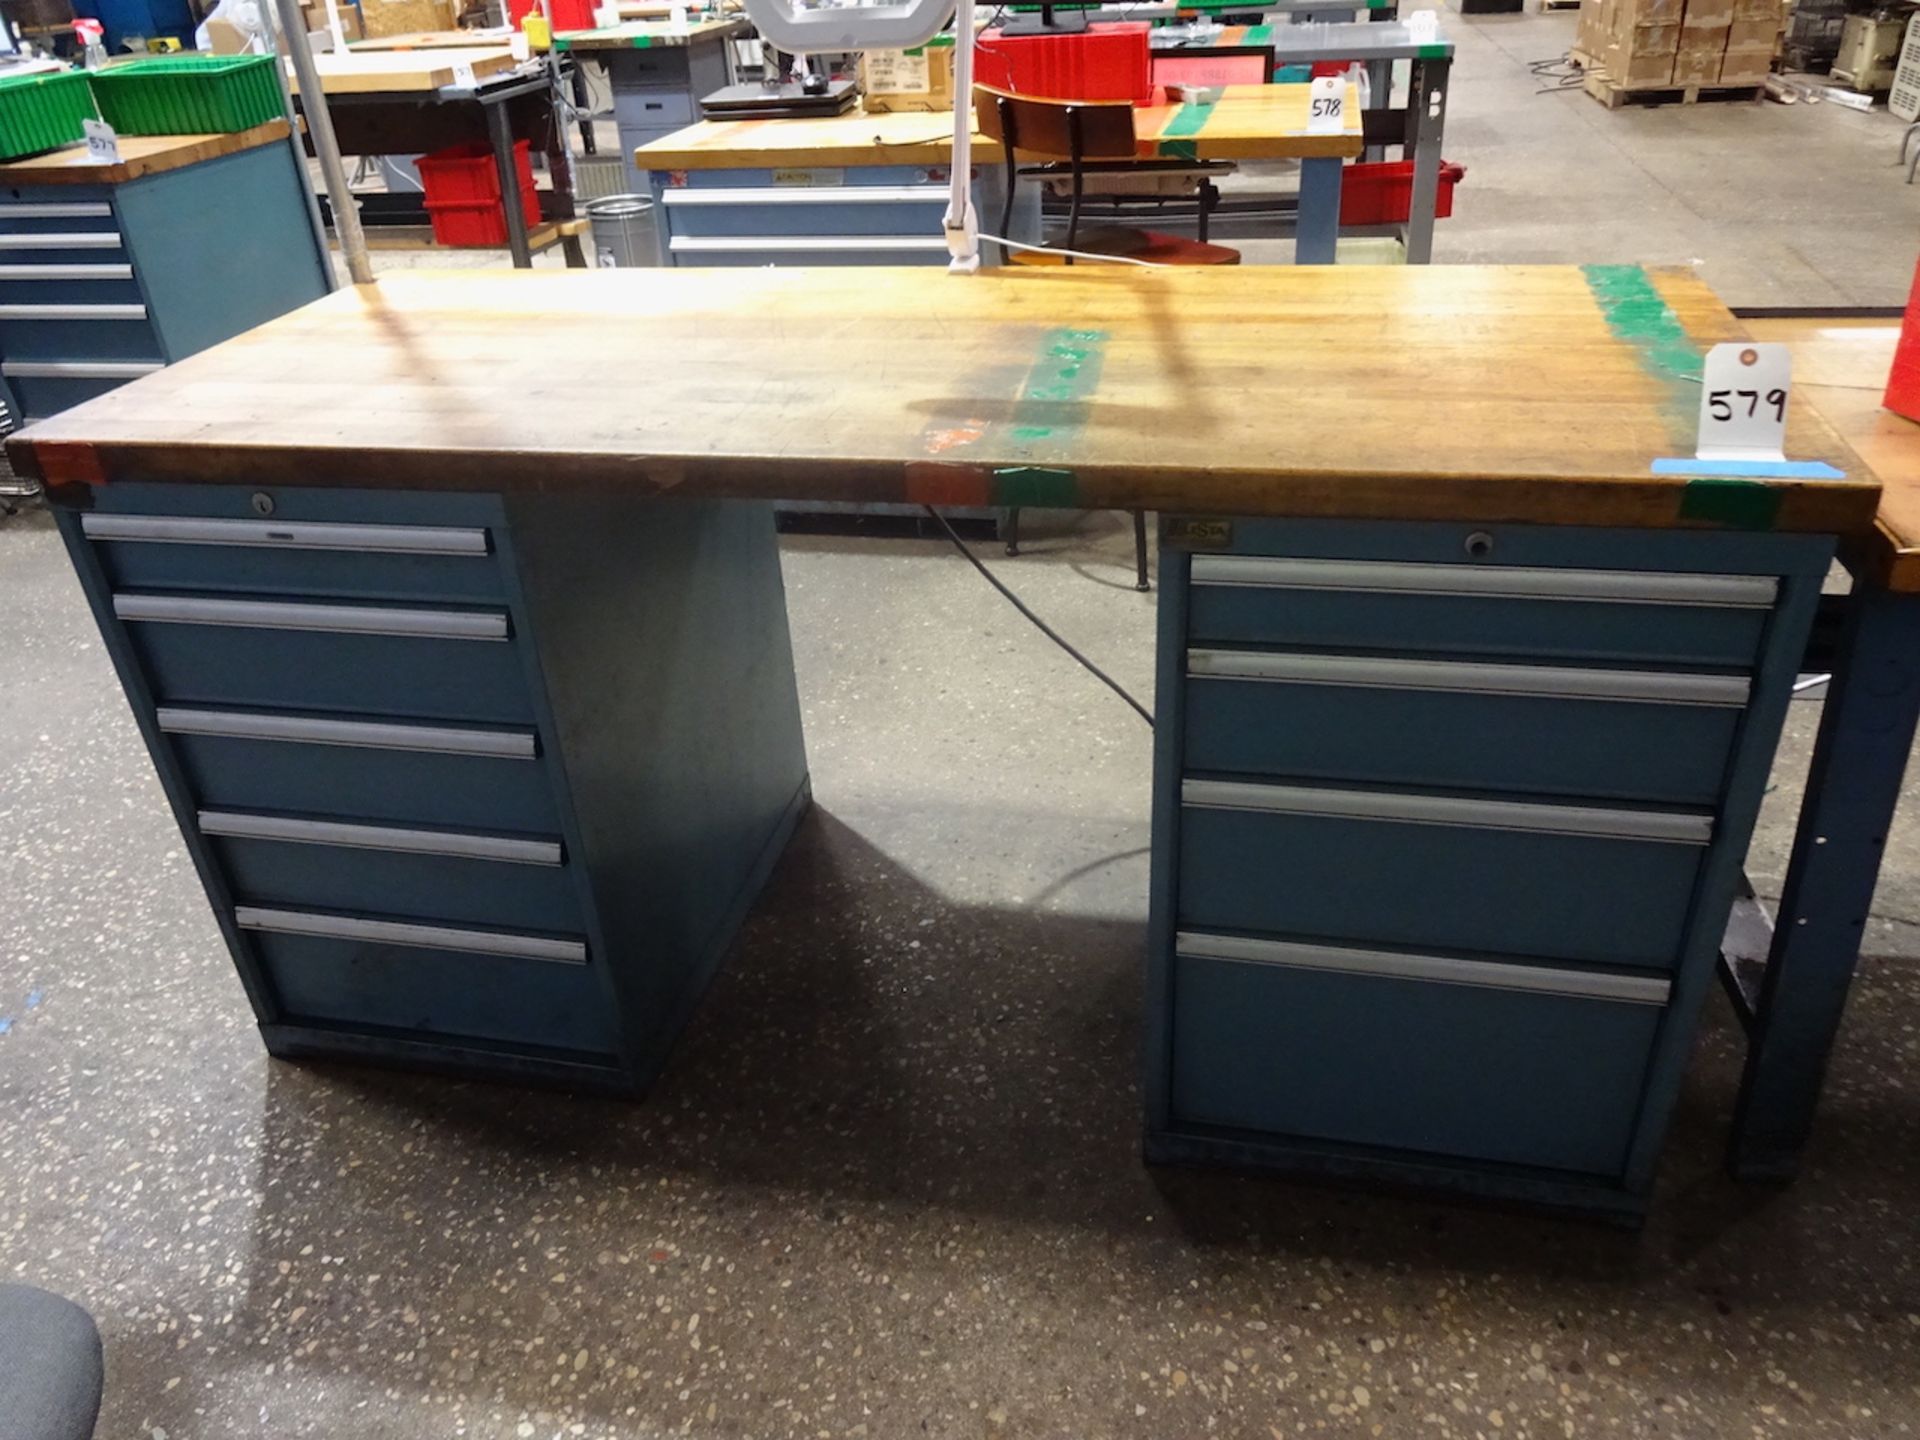 LOT: MAPLE TOP WORK BENCH, WITH (2) LISTA STORAGE CABINETS